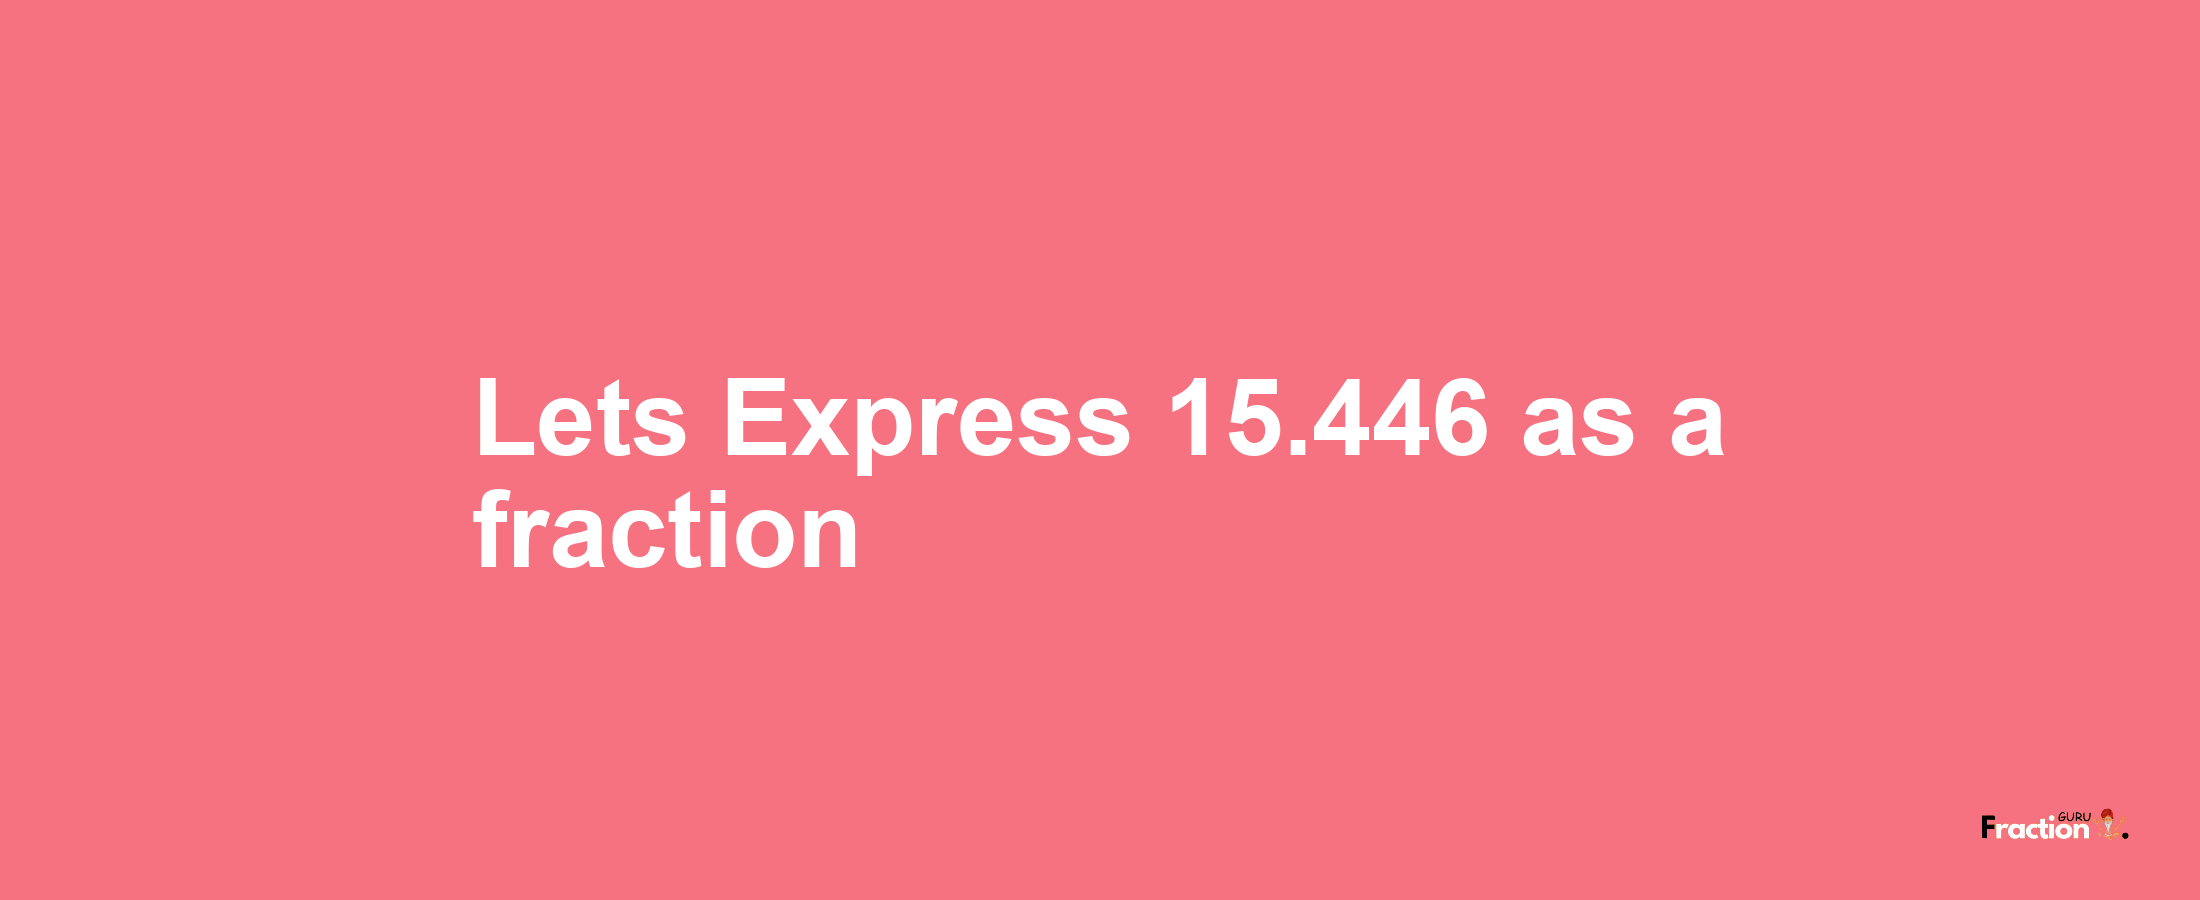 Lets Express 15.446 as afraction